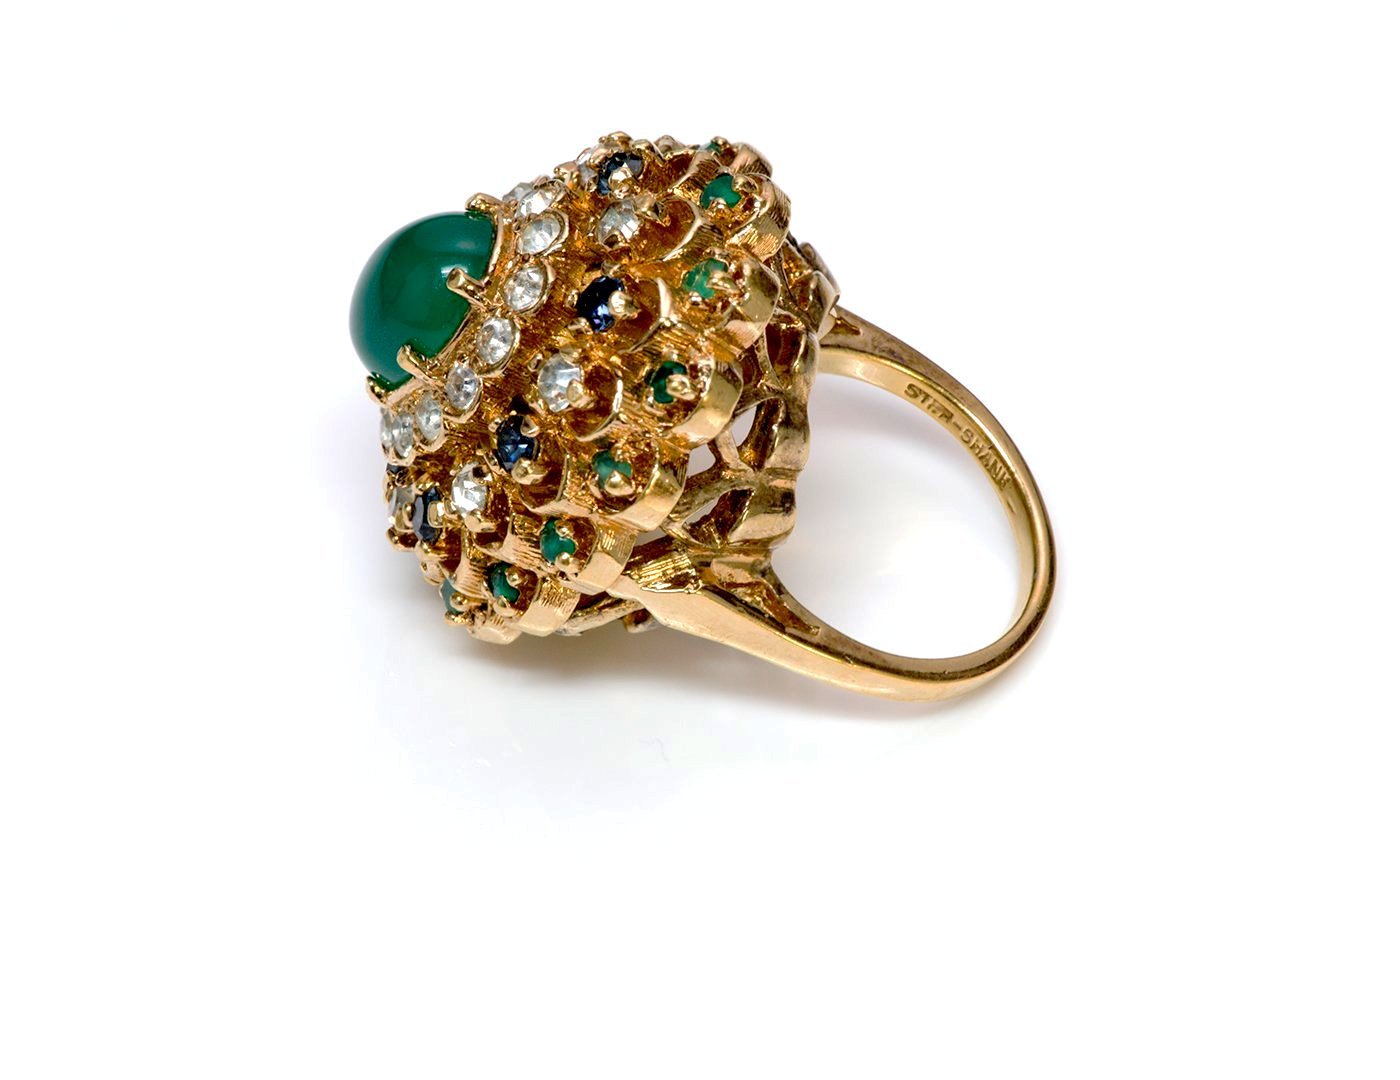 Panetta Faux Emerald Crystal Cocktail Ring